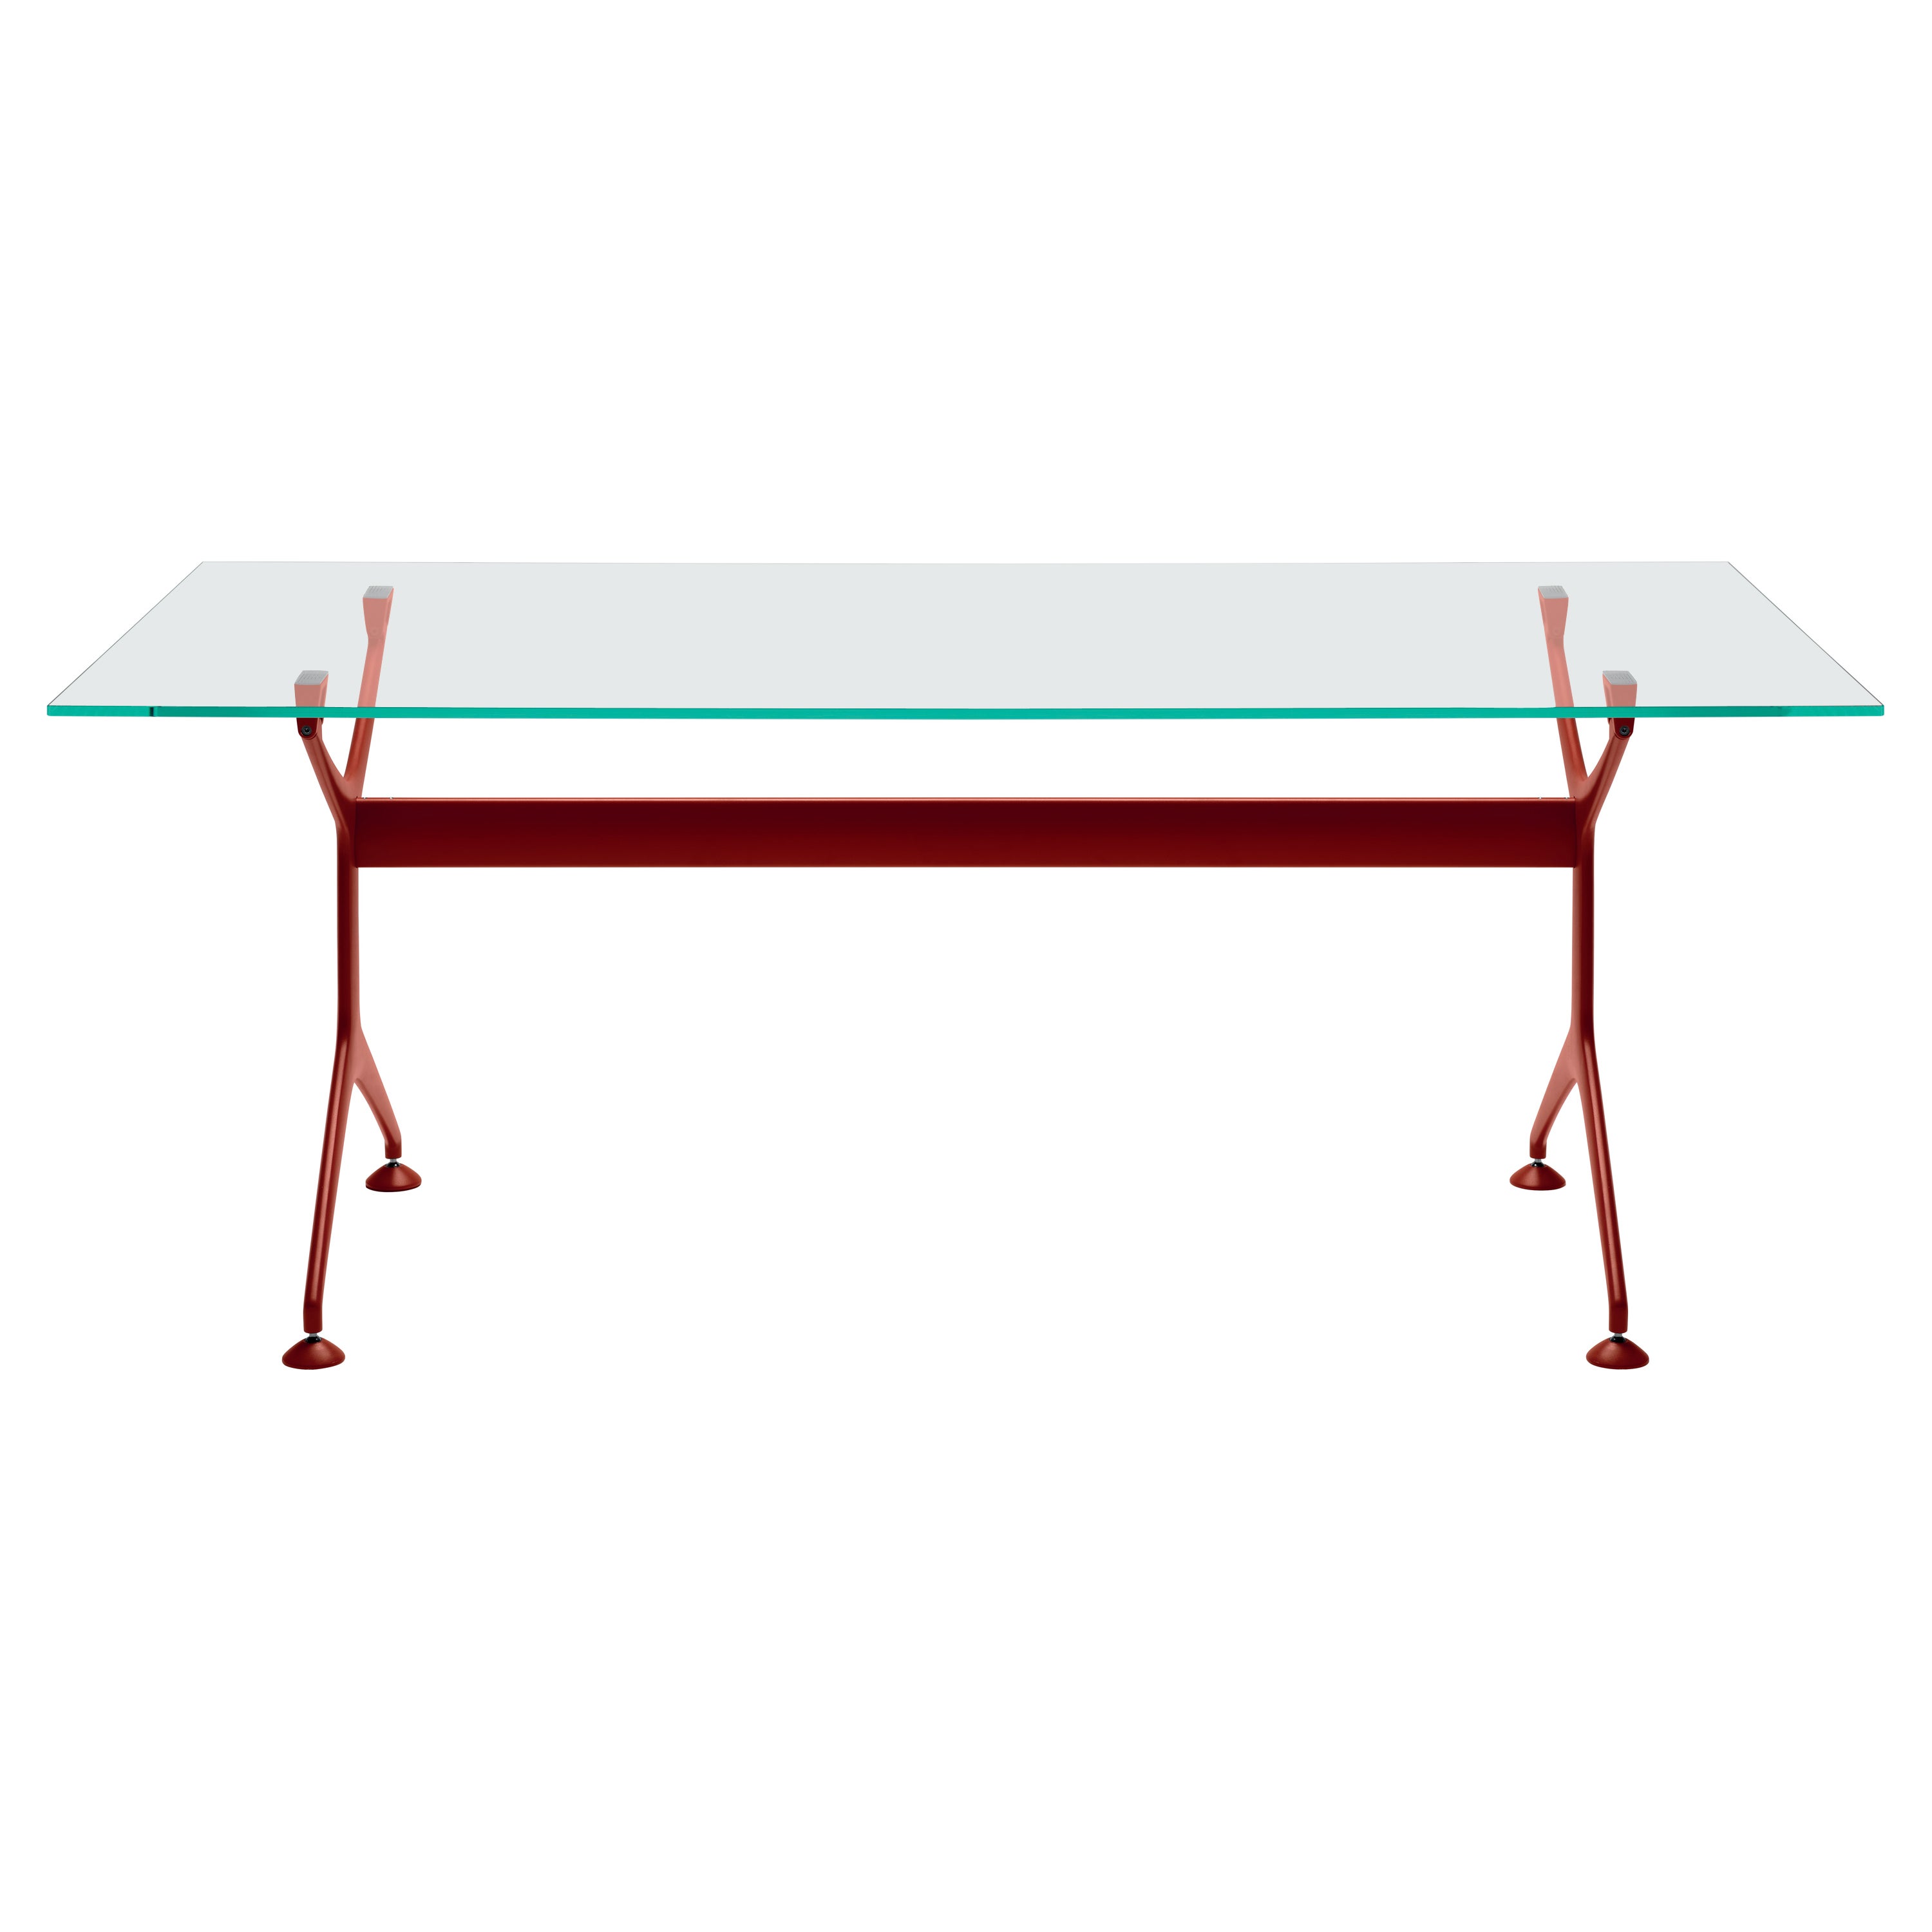 Alias Frametable 160 in Glass Top with Coral Red Lacquered Aluminium Frame